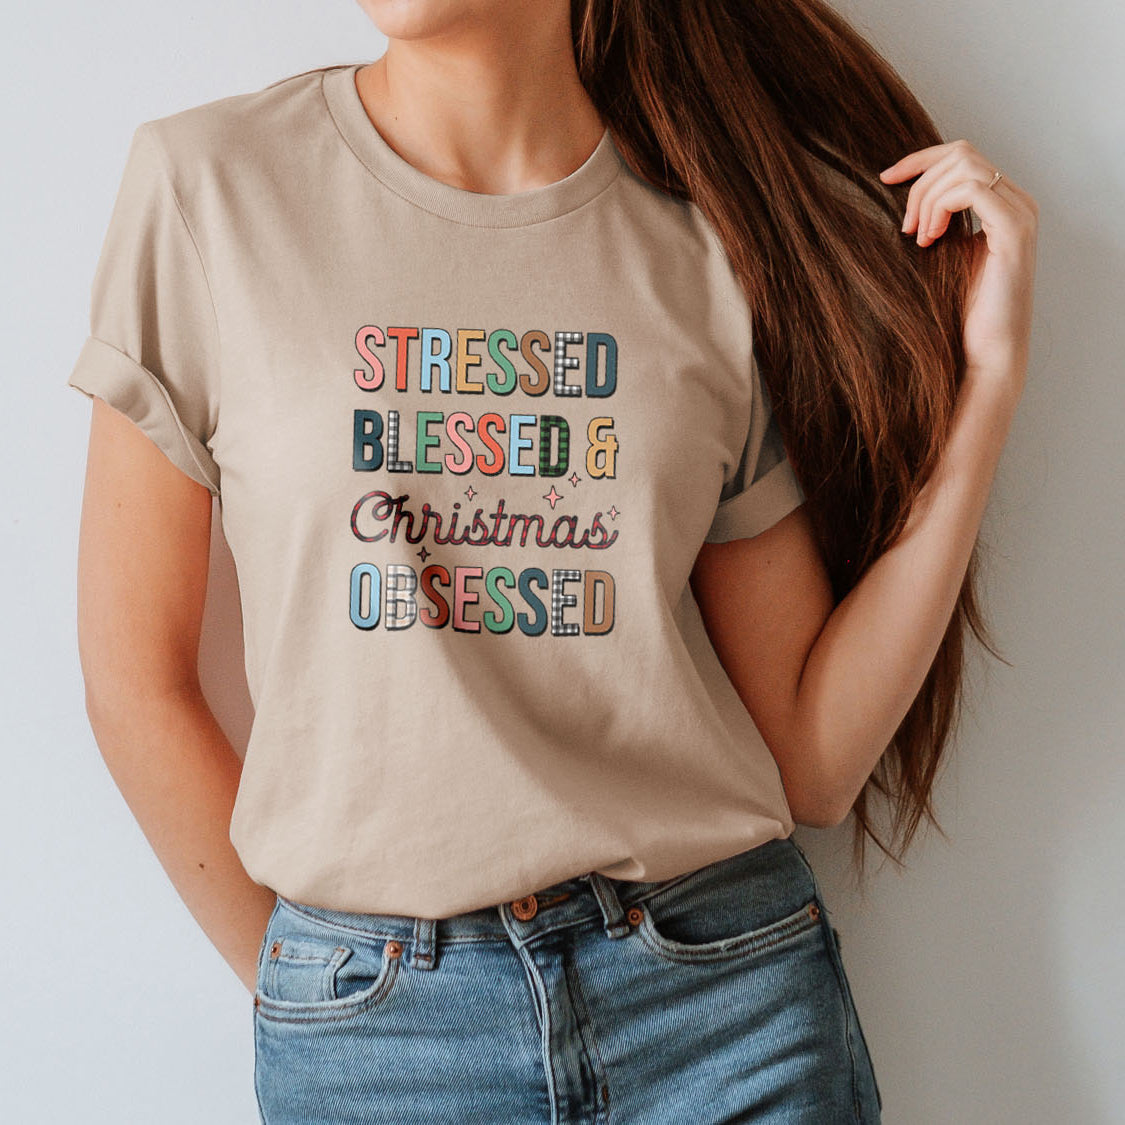 Stressed Blessed & Christmas Obsessed T-shirt - Christmas Winter Retro Vintage Design Printed Tee Shirt